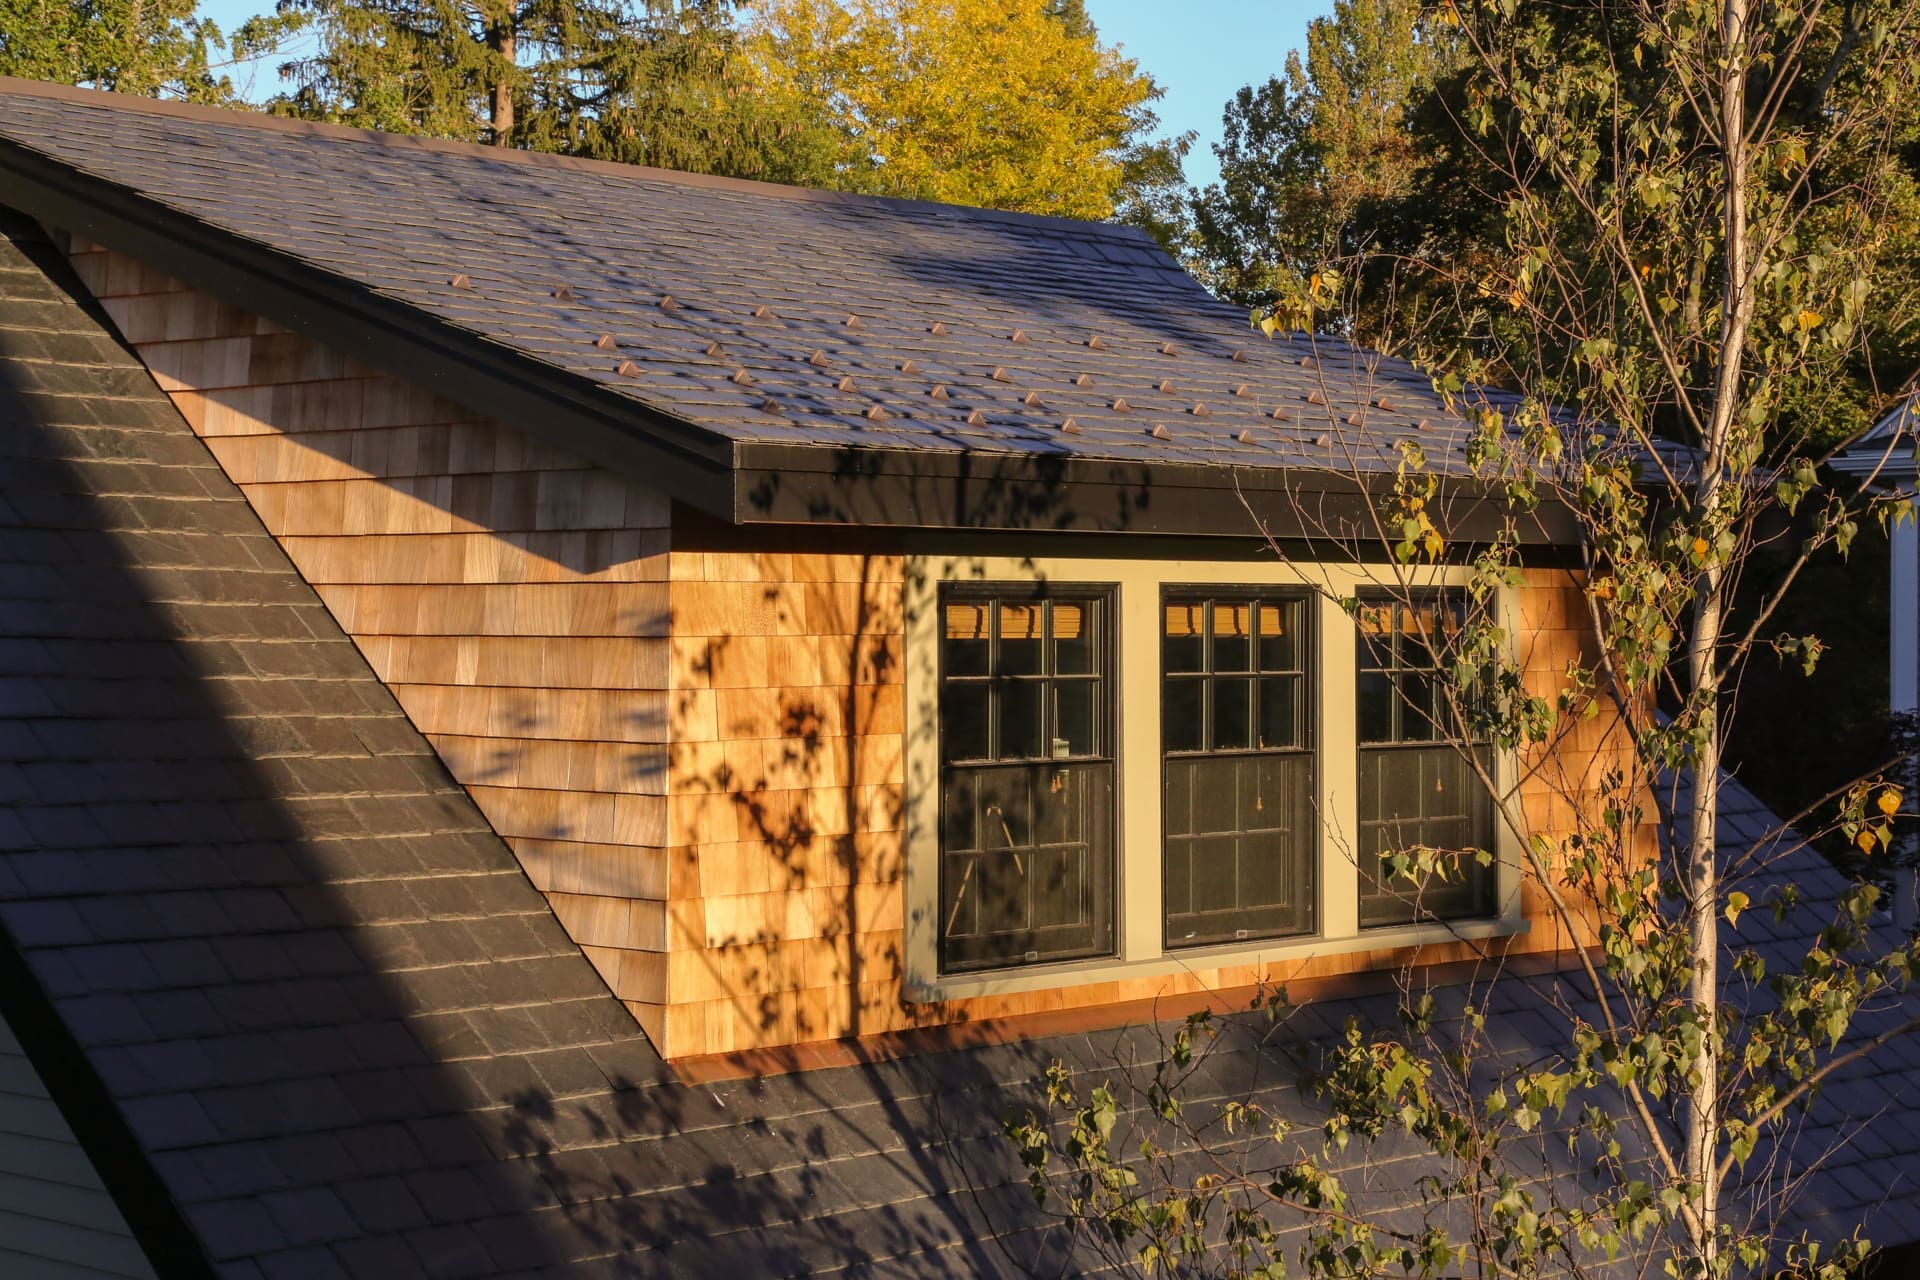 A photo of a dormer roof with black stone shingles, natural wood shingle siding, and grey-green window trim.